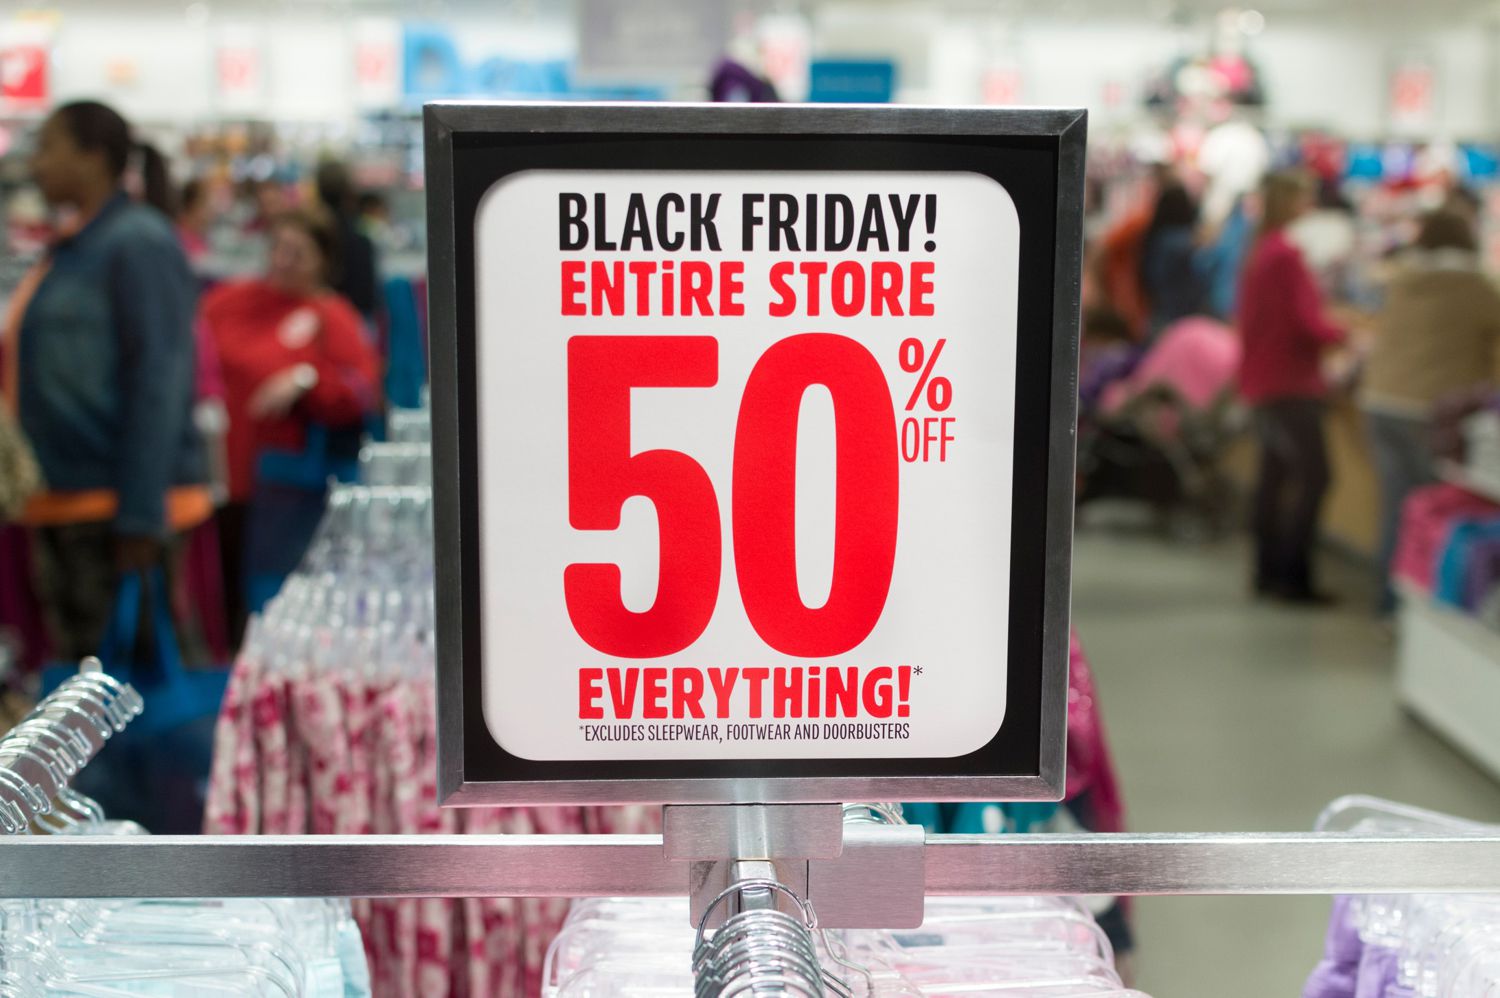 10 Tips to Get the Most Out of Black Friday Deals - Why Black Friday Deals